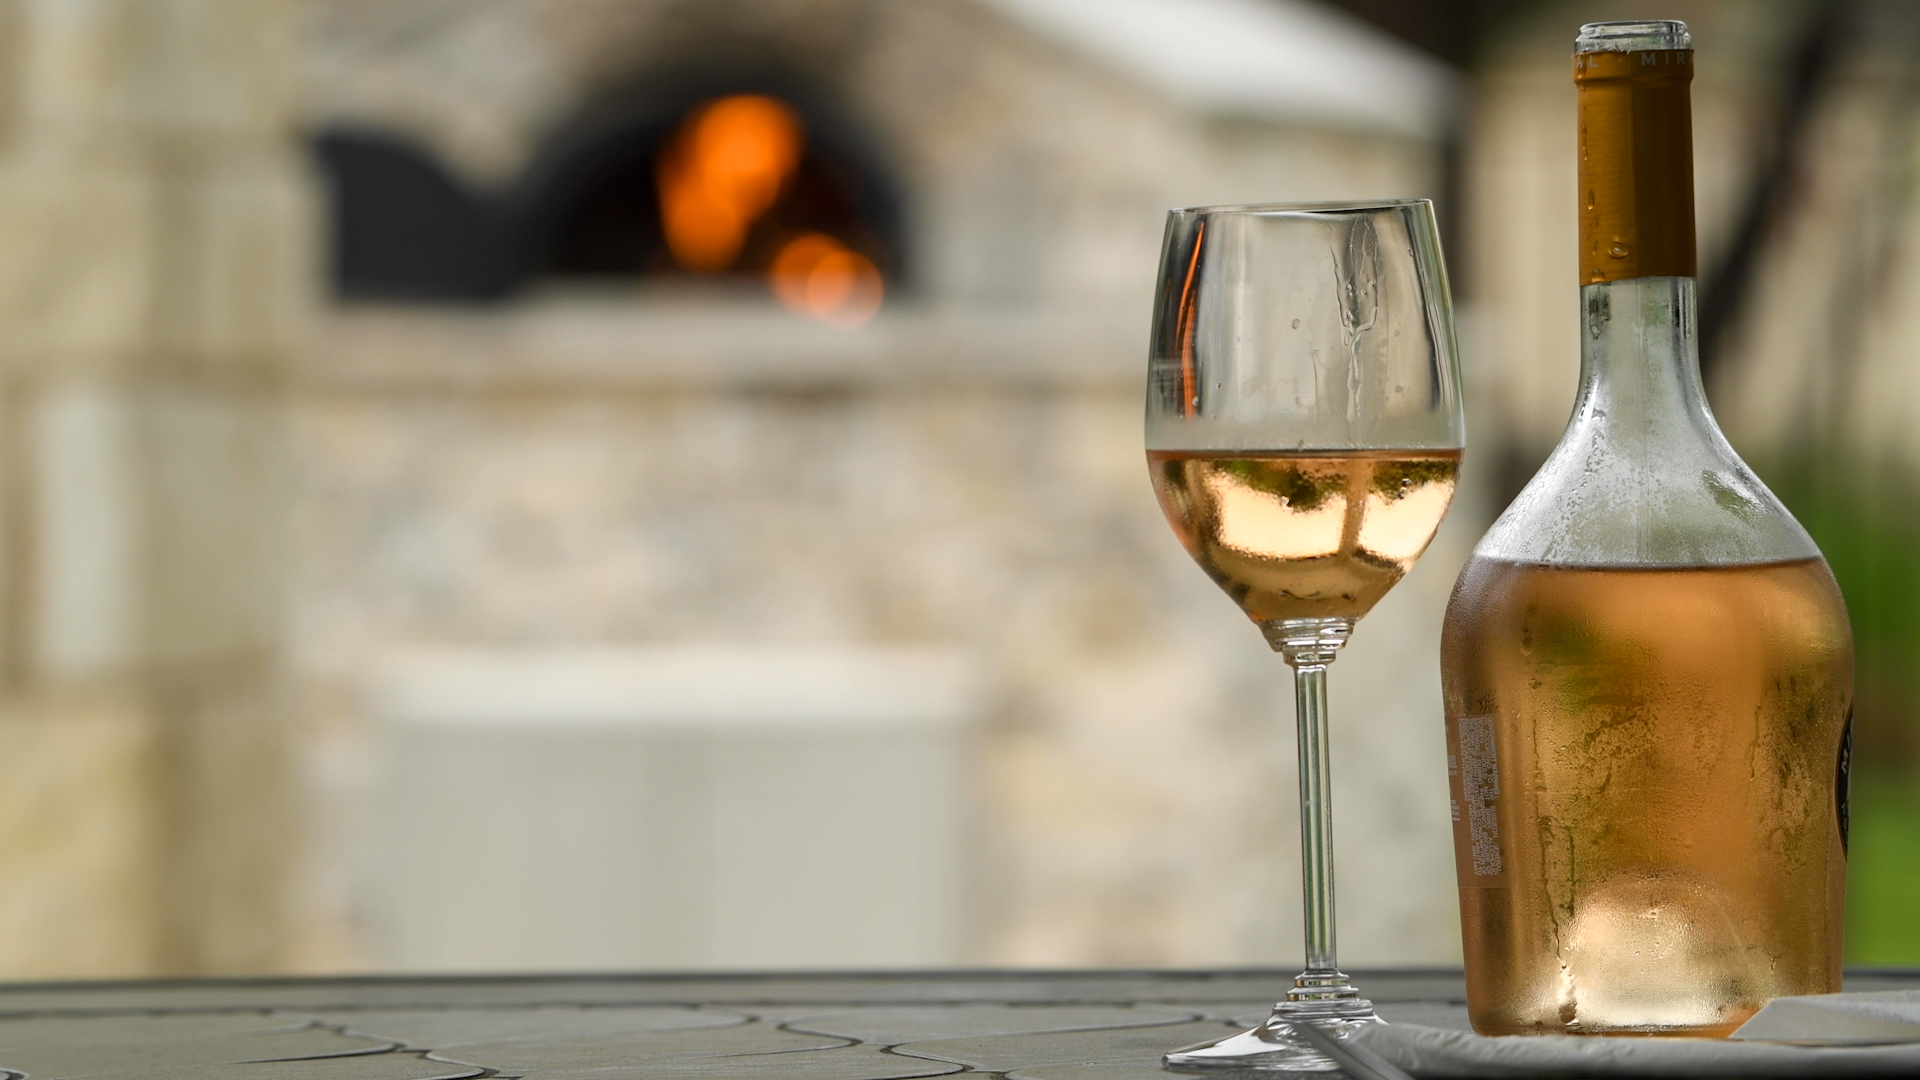 Enjoy a Glass of Wine While the Wood-Fired Oven Warms Up.